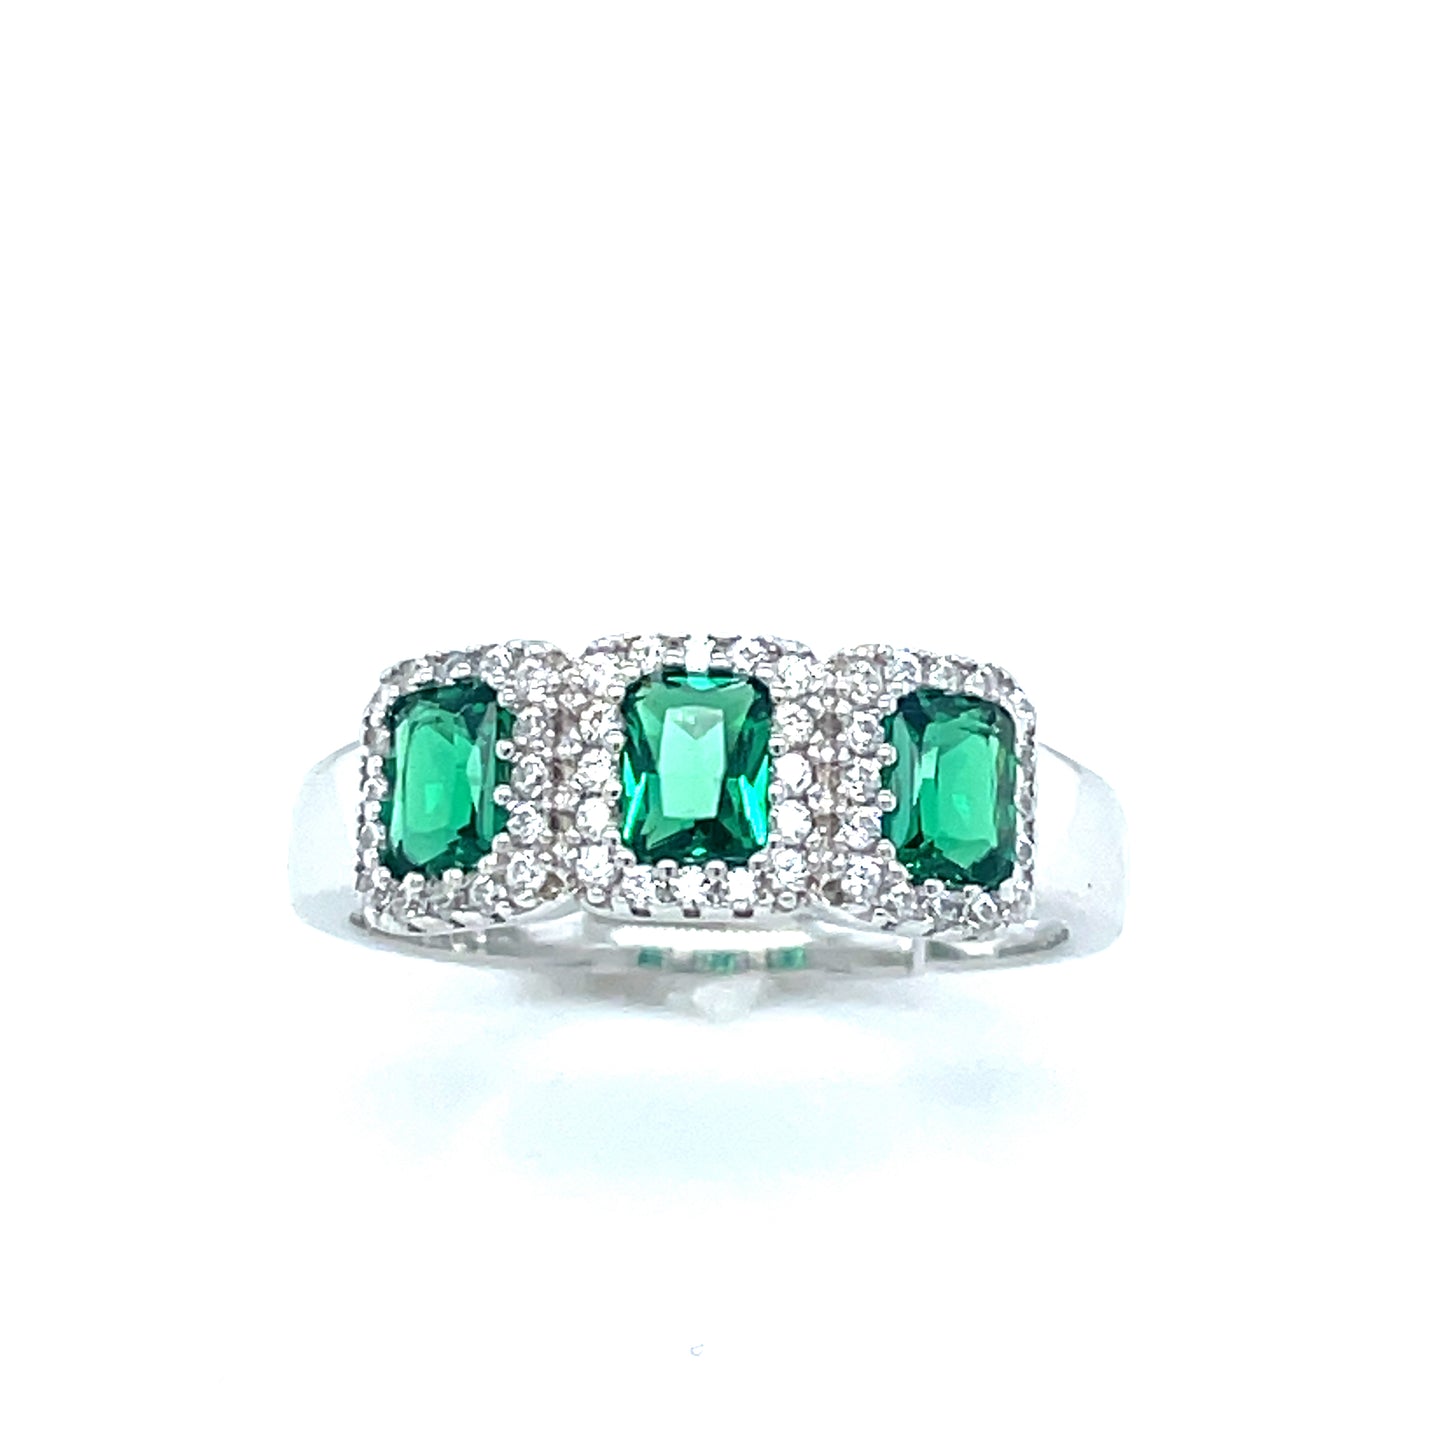 STERLING SILVER CUBIC ZIRCONIA AND GREEN STONE 3 STONE HALO EXPANDER RING